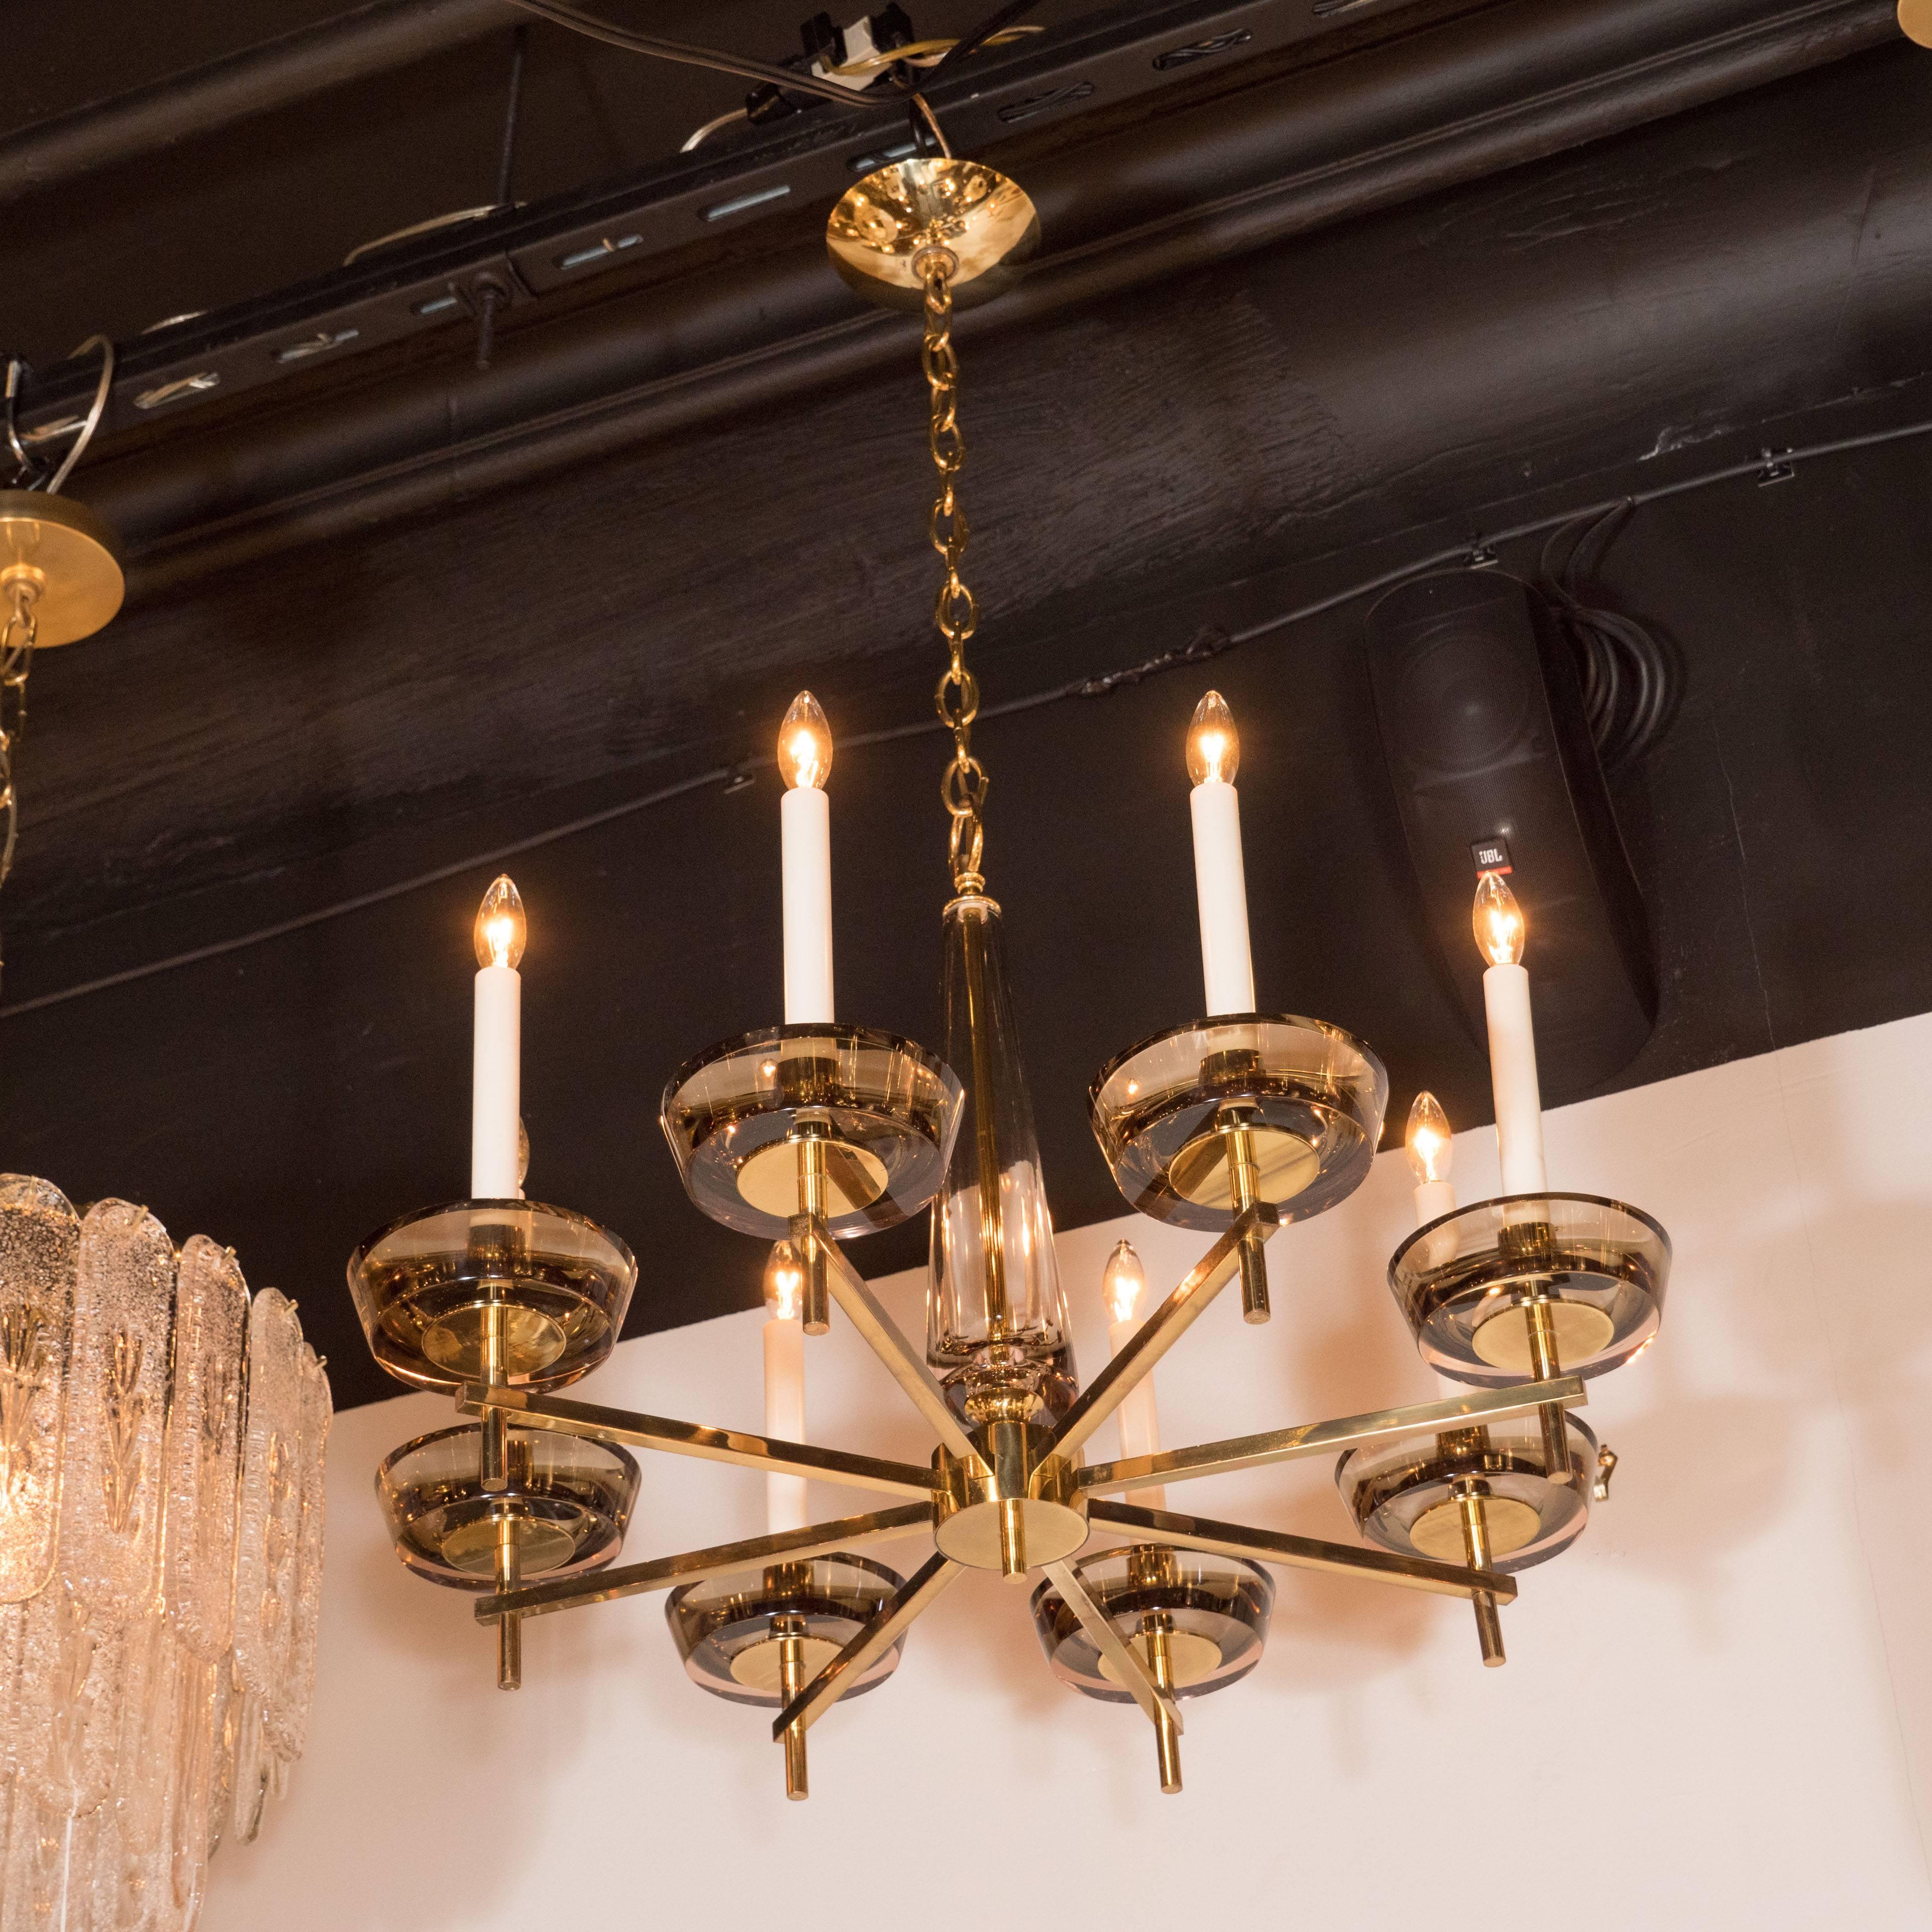 This stunning and graphic eight-arm chandelier was realized in Italy, circa 1960. It features eight fine rectangular arms that connect to smoke glass cupolas each housing a single candelabra based bulb. The arms attach to a cylindrical body with a